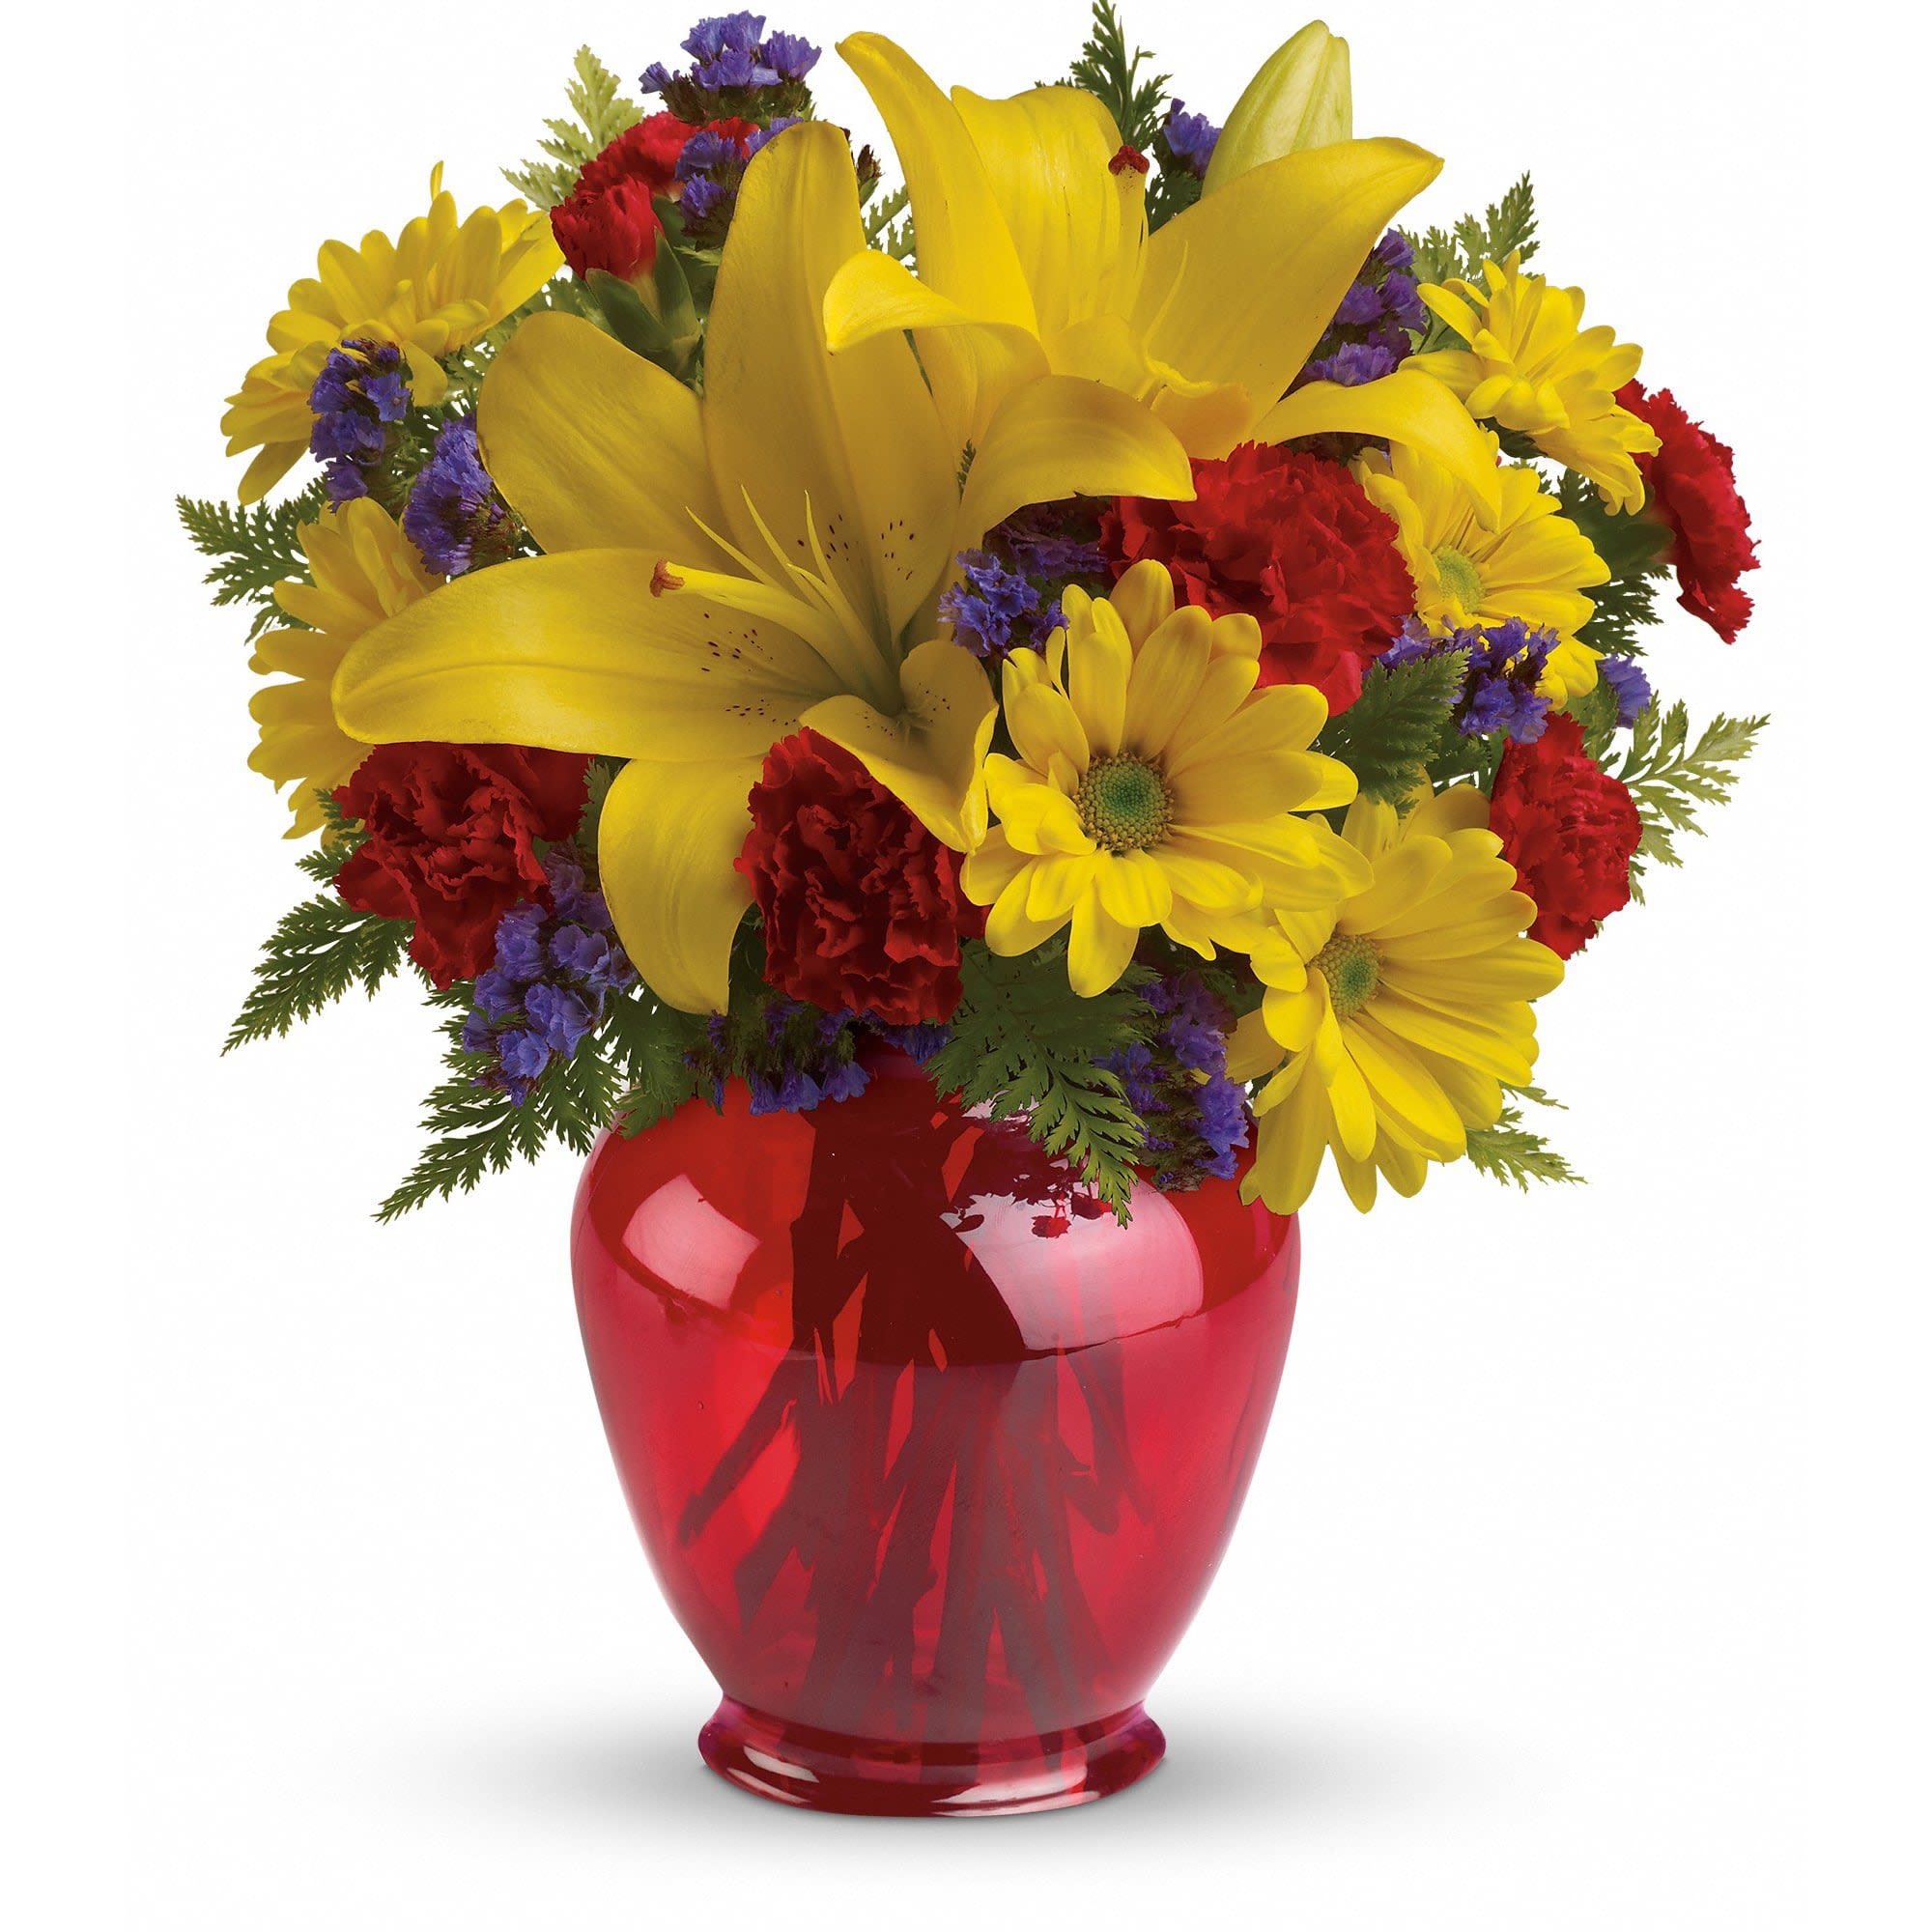 Teleflora's Let's Celebrate Bouquet - It's time to celebrate with bold, bright flowers! Arranged in a charming red ginger jar vase, this gorgeous gift of golden lilies and yellow daisies marks any occasion with pizzazz!  